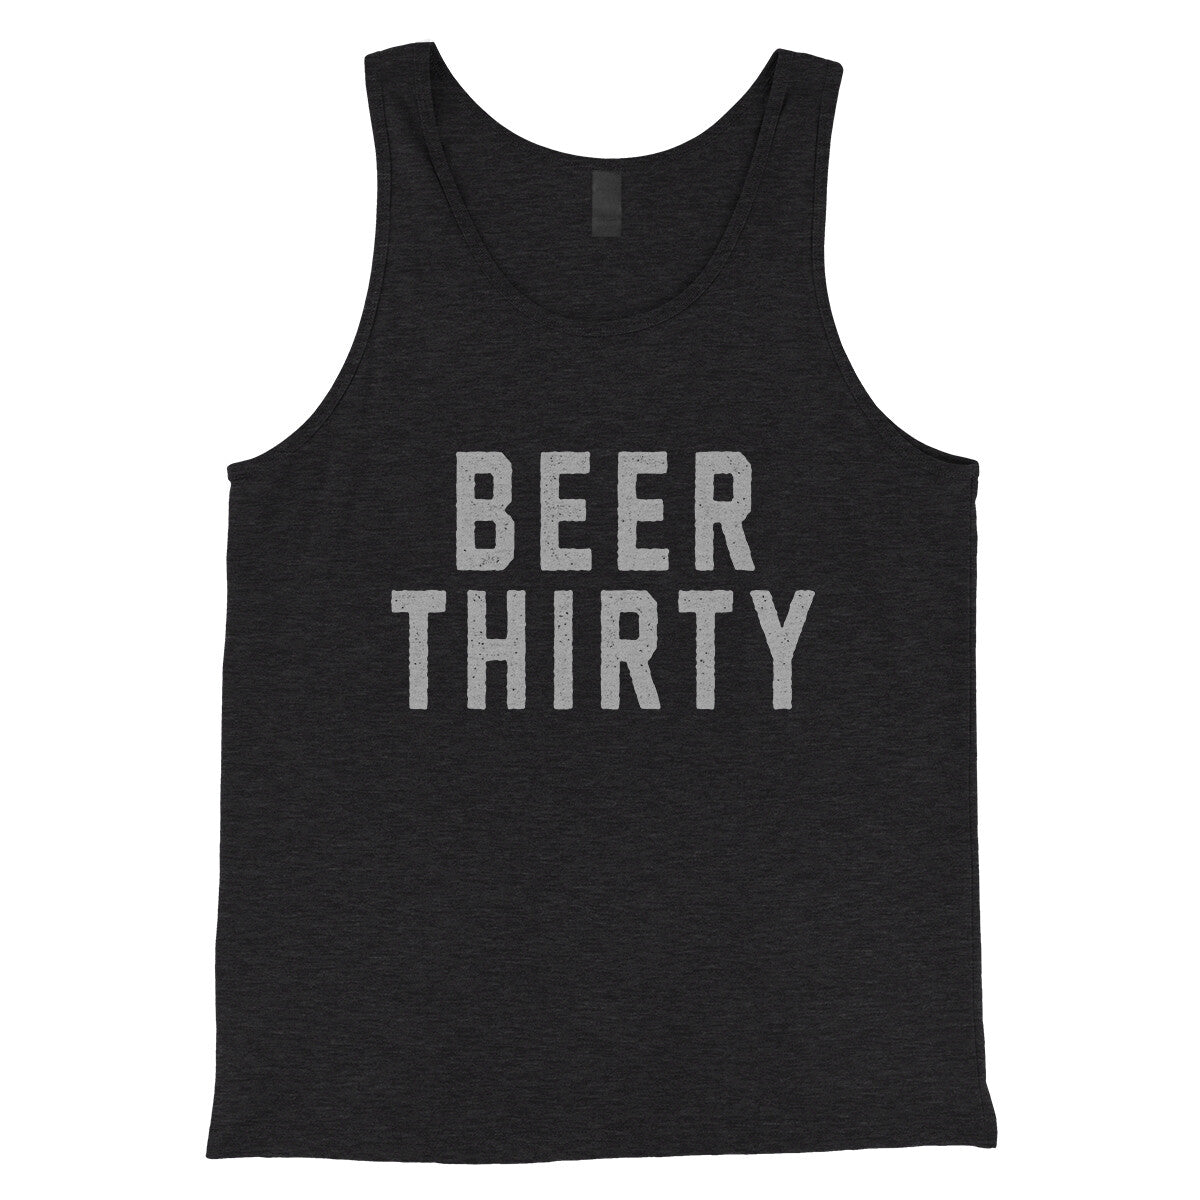 Beer Thirty in Charcoal Black TriBlend Color